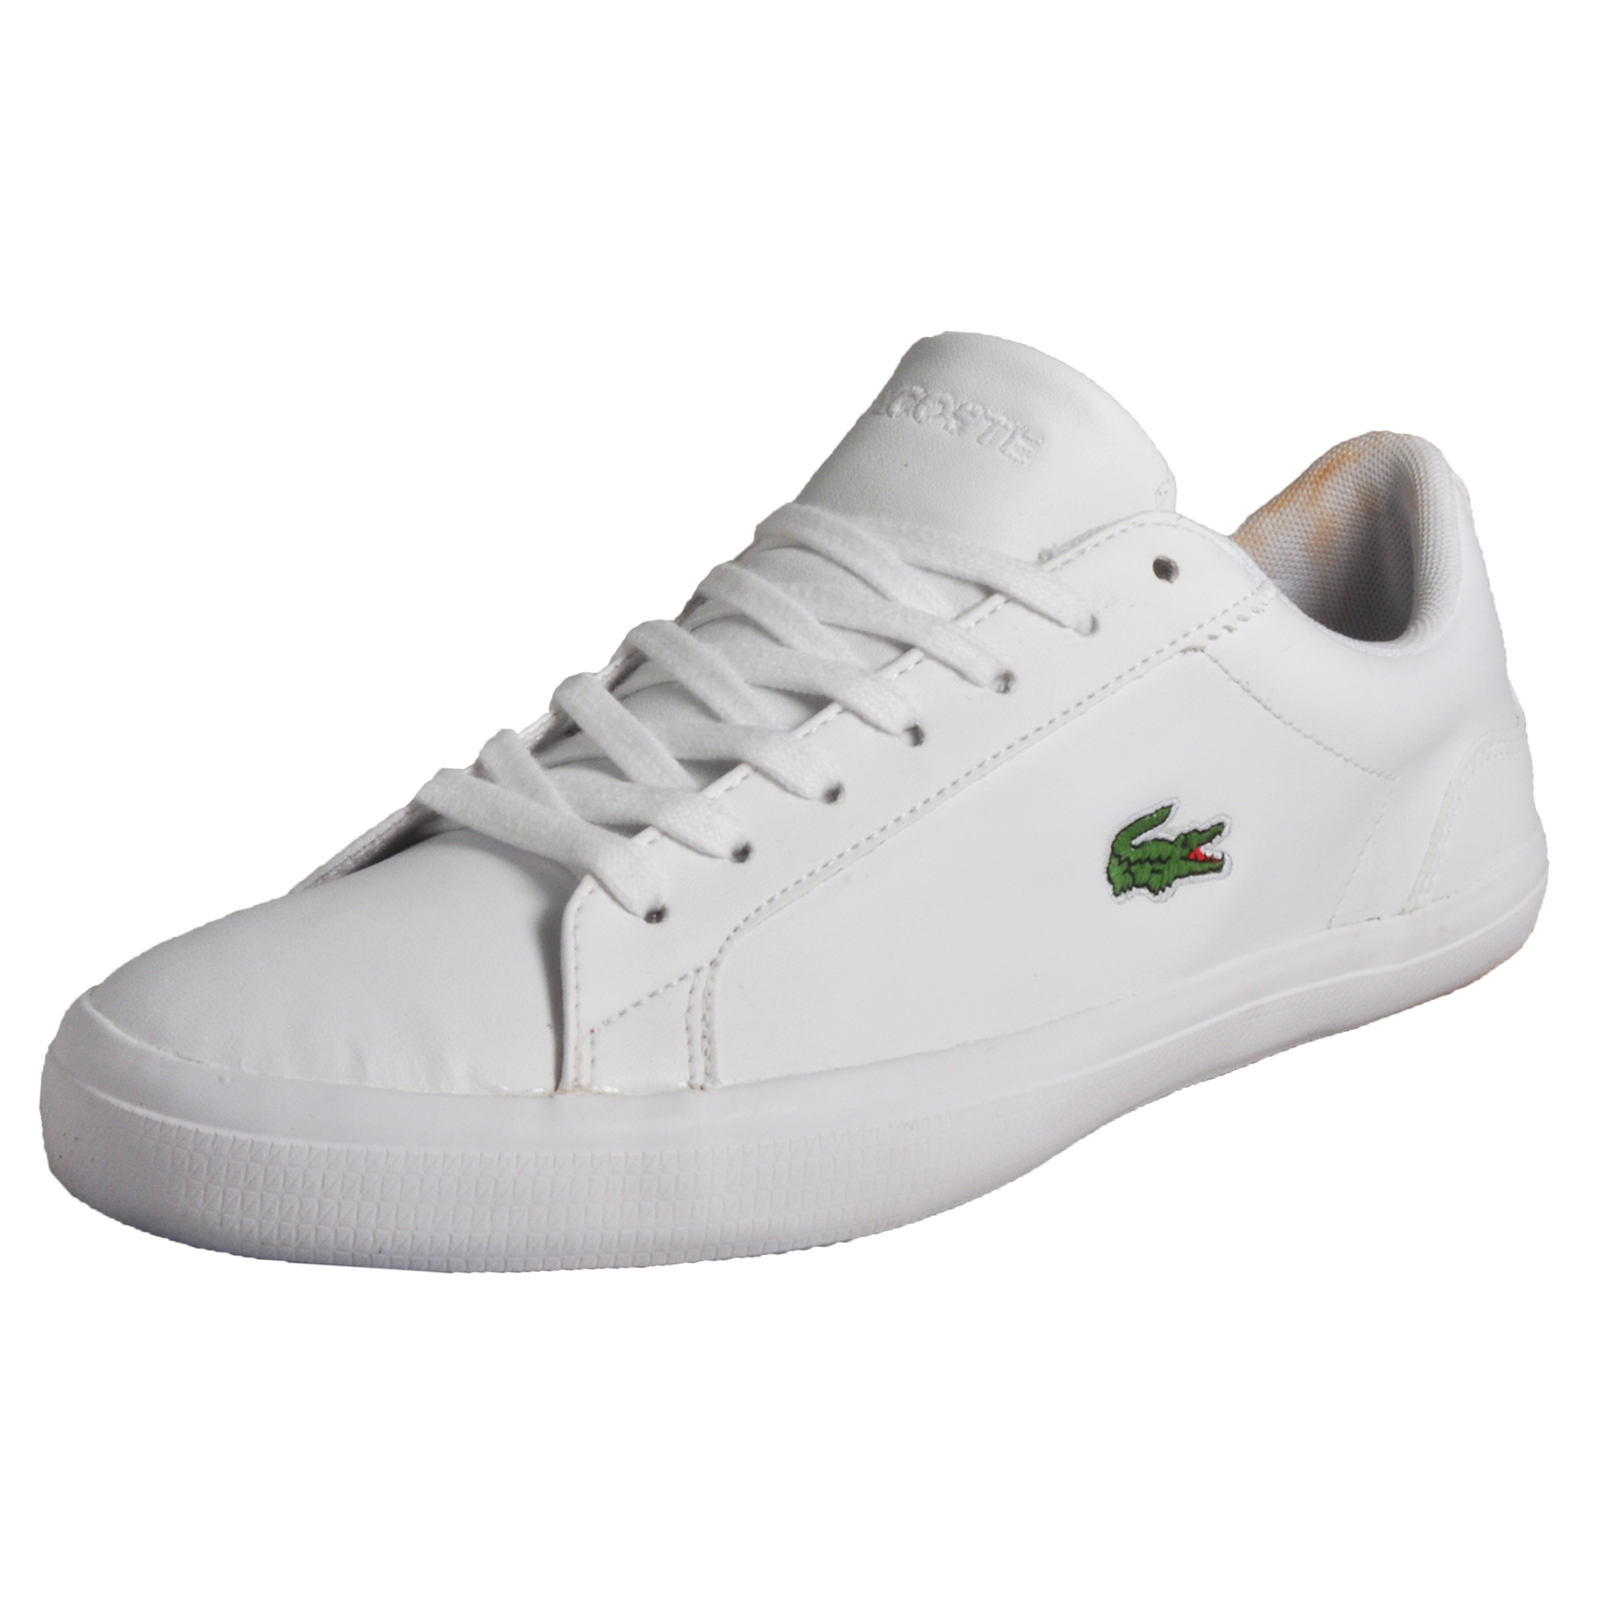 lacoste lerond mens trainers - 63% OFF 